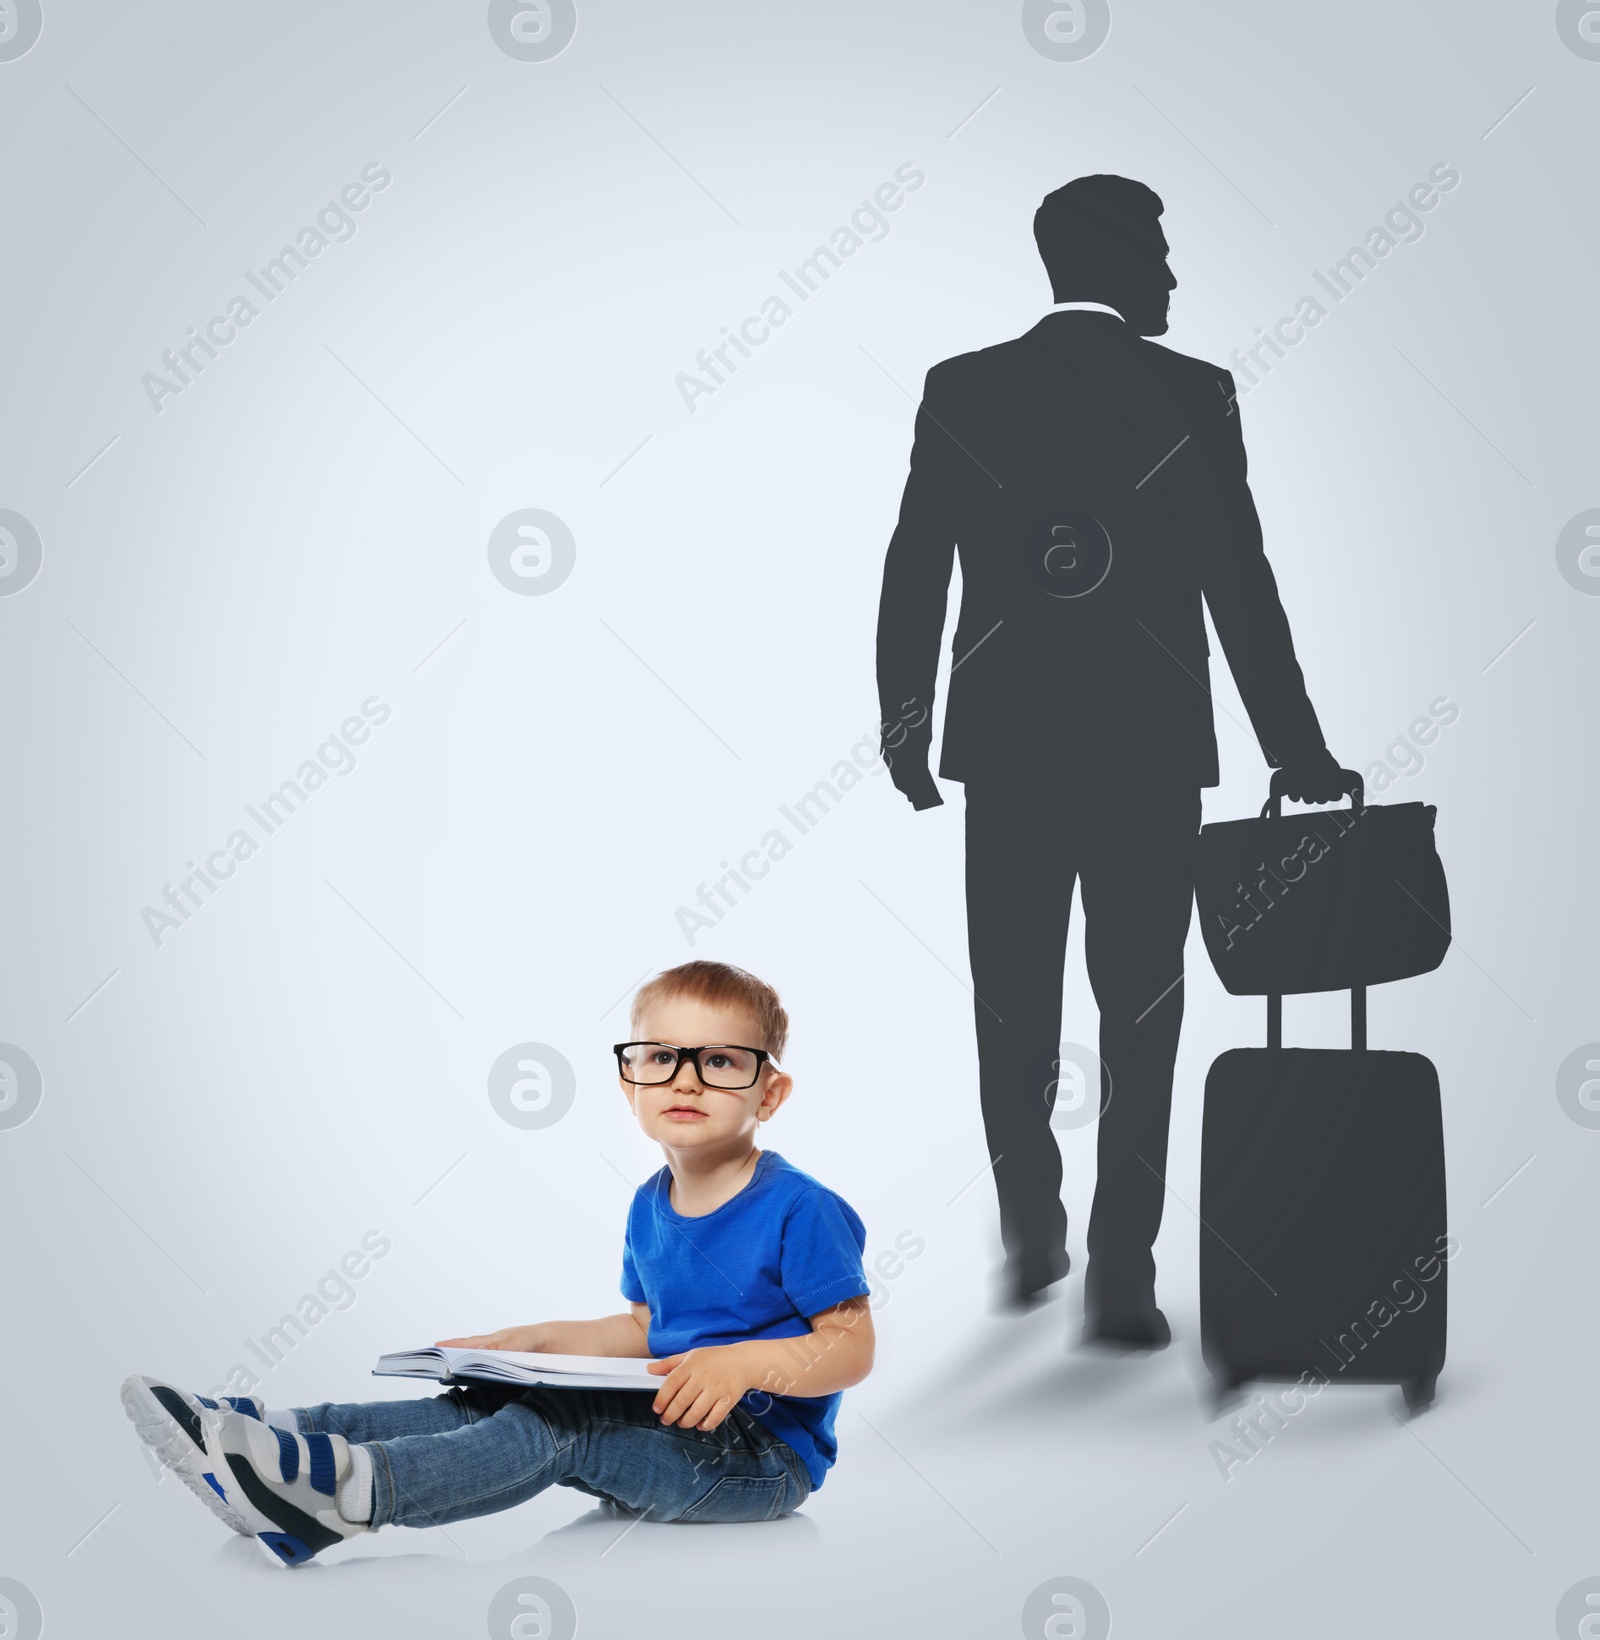 Image of Little boy with book dreaming to be businessman. Silhouette of man behind kid's back